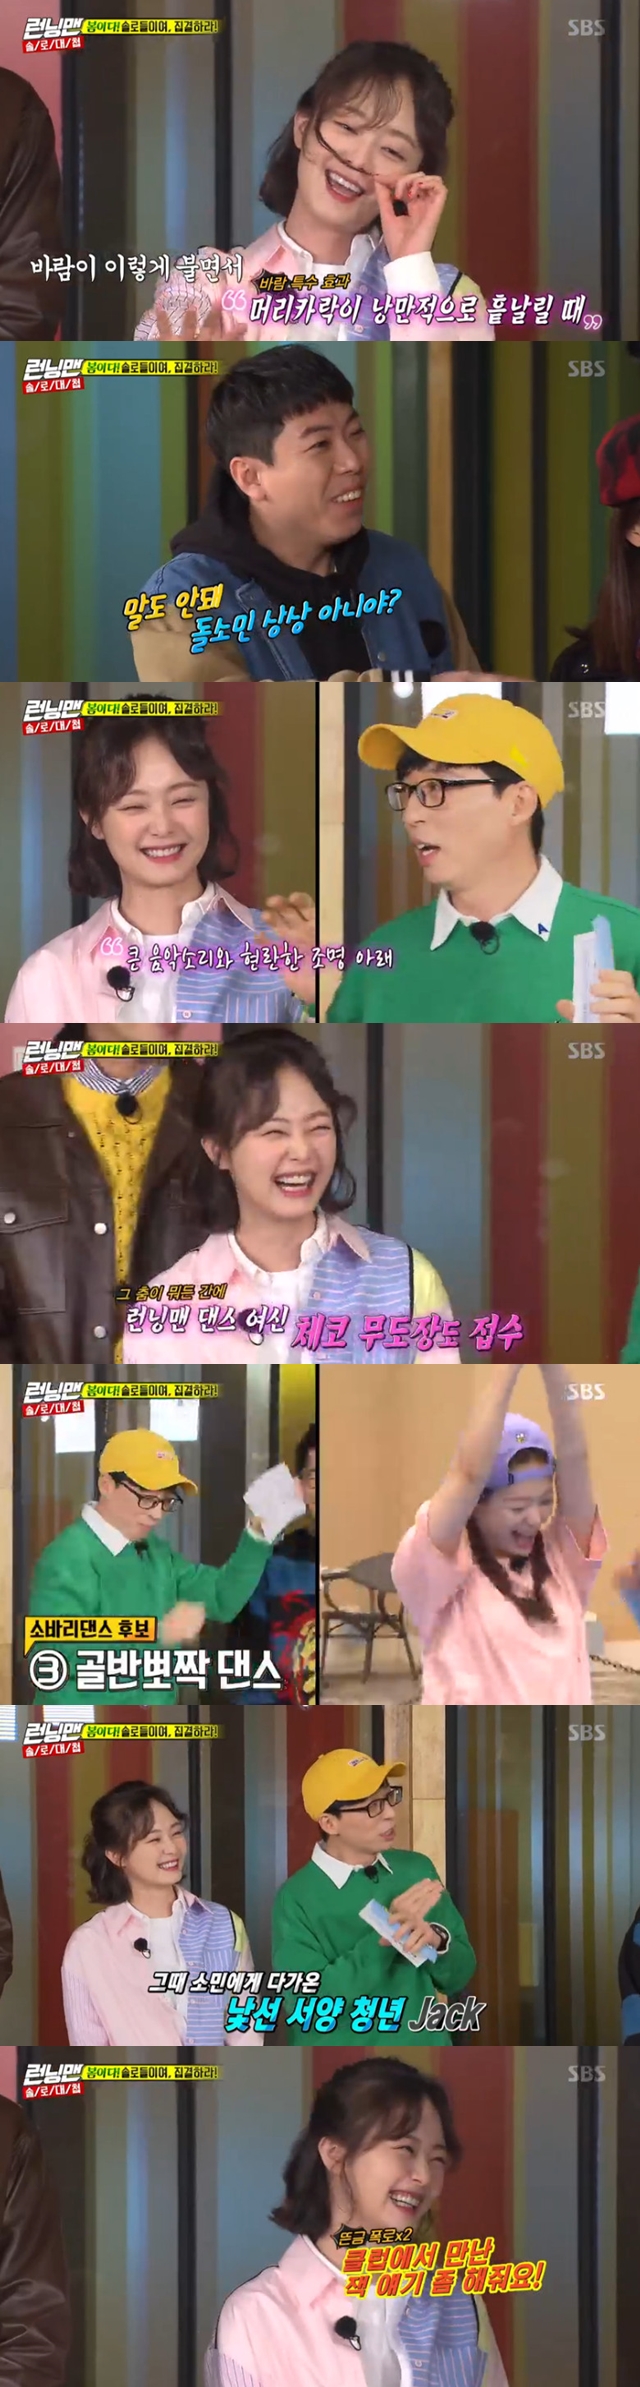 Jeon So-min emits borderless charm?Actor Jeon So-min released the review of Czech Republic trip on SBS Running Man broadcast on March 31st.According to Yoo Jae-Suk, Jeon So-min had a fateful meeting with Jack, a local man he met at the Czech Republic famous Sams Club.Yoo Jae-Suk said, At Sams Club, a man approached Jeon So-min and just said in English, No English, and he said, I like your dance with a translator.So, Jeon So-min recalled, There was a single thing under big music and glitzy lights, and the atmosphere was just La Boom.I was fatefully going to Bronx Zoo the next day and I met again, said Jeon So-min, who was playing with the otter. It was a day when the sun was shining.When the wind blew and the hair was romantically scattered, I looked around at Hey and Jack said In Sams Club. bak-beauty